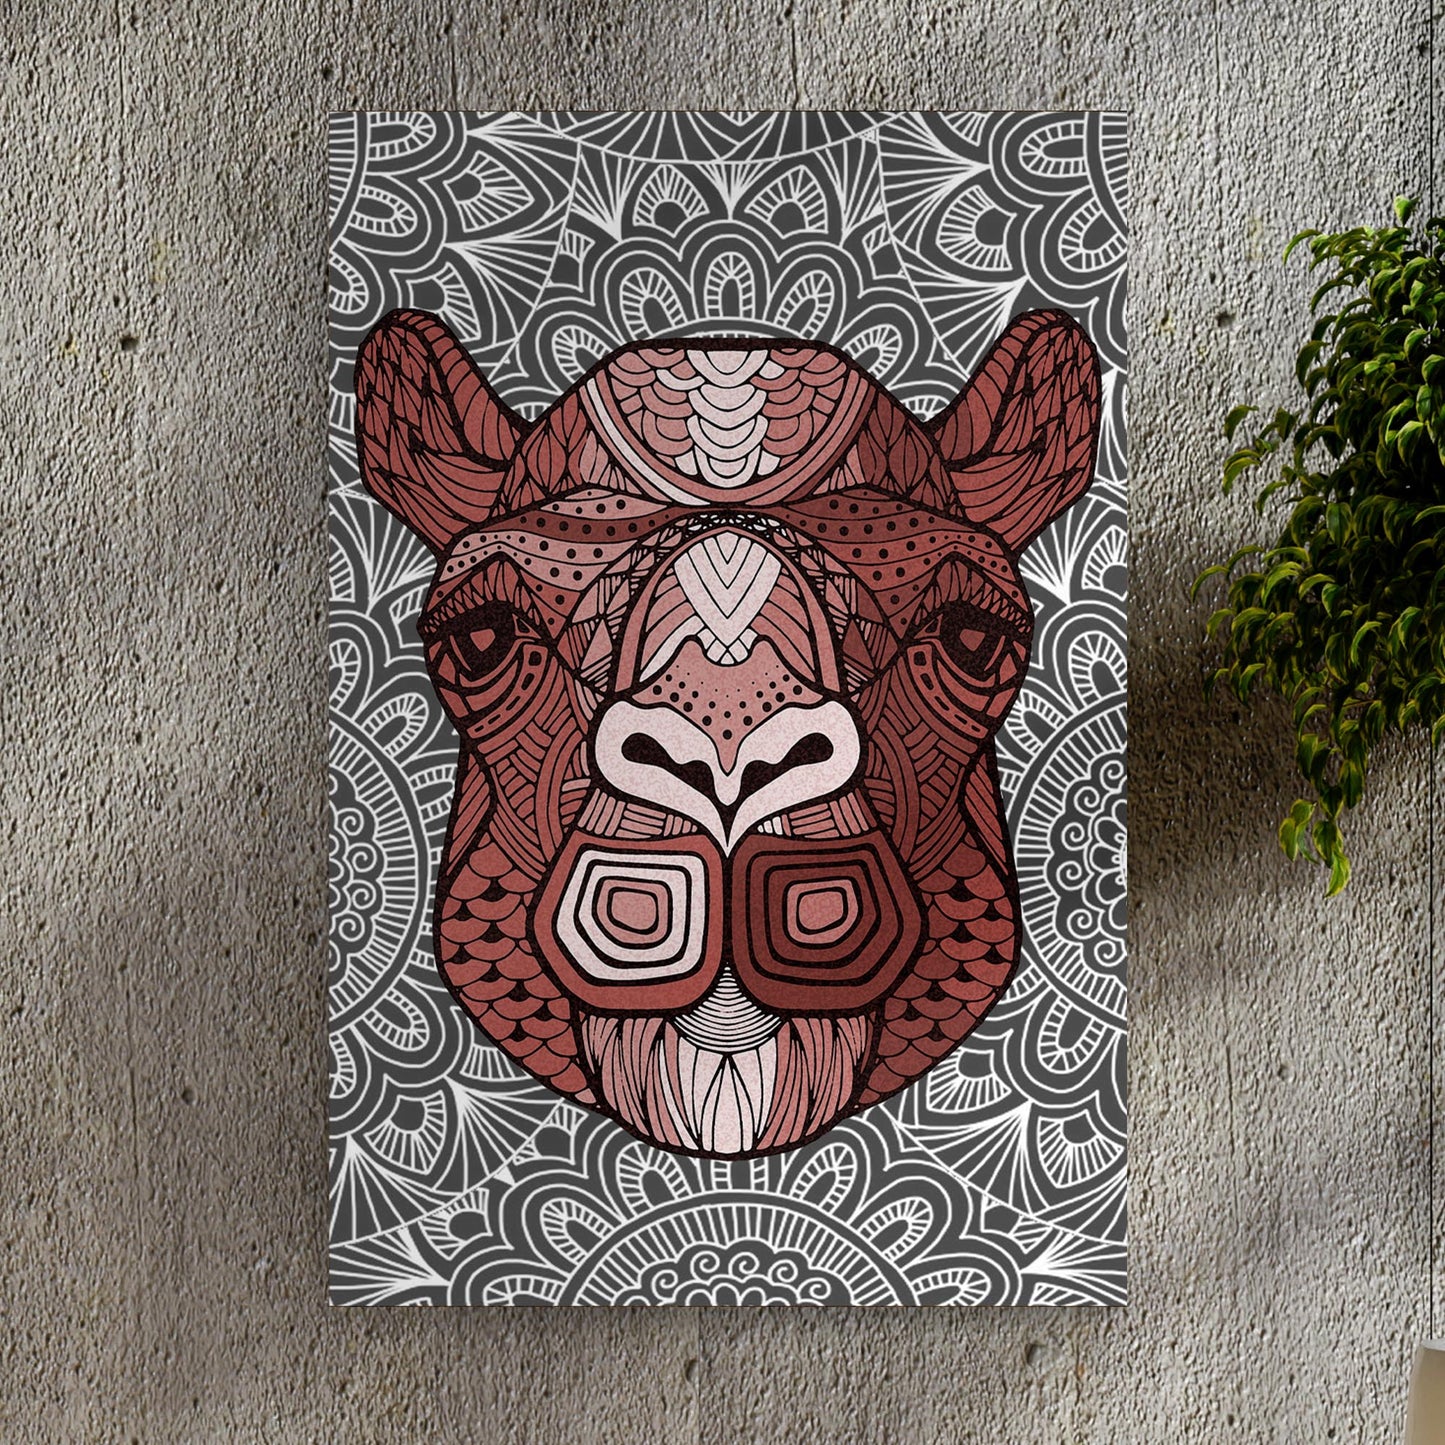 Zentangle Camel Portrait Canvas Wall Art - Image by Tailored Canvases